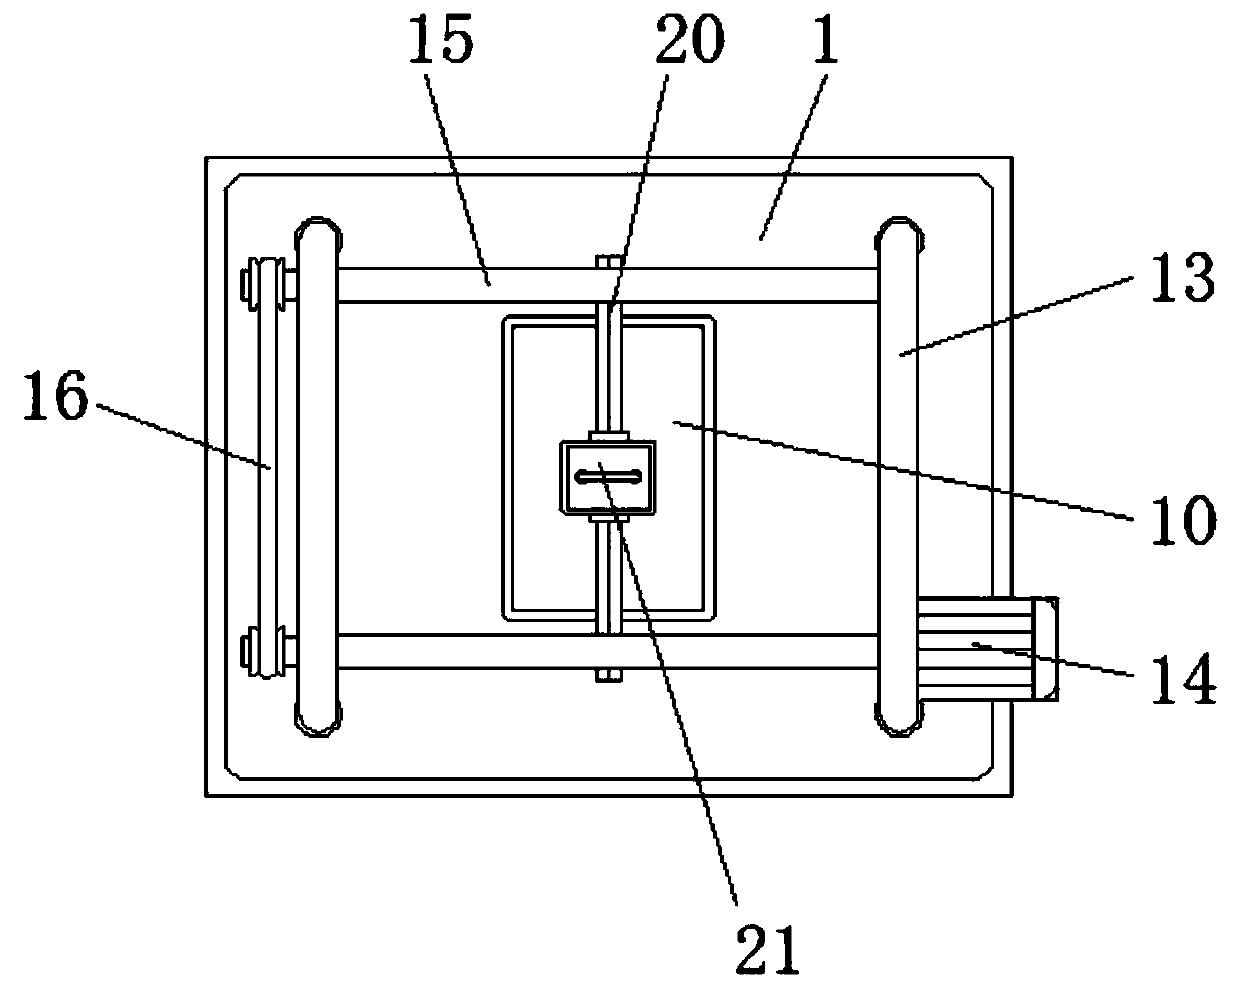 Welding support device convenient to finely adjust for quartz-crystal resonator processing